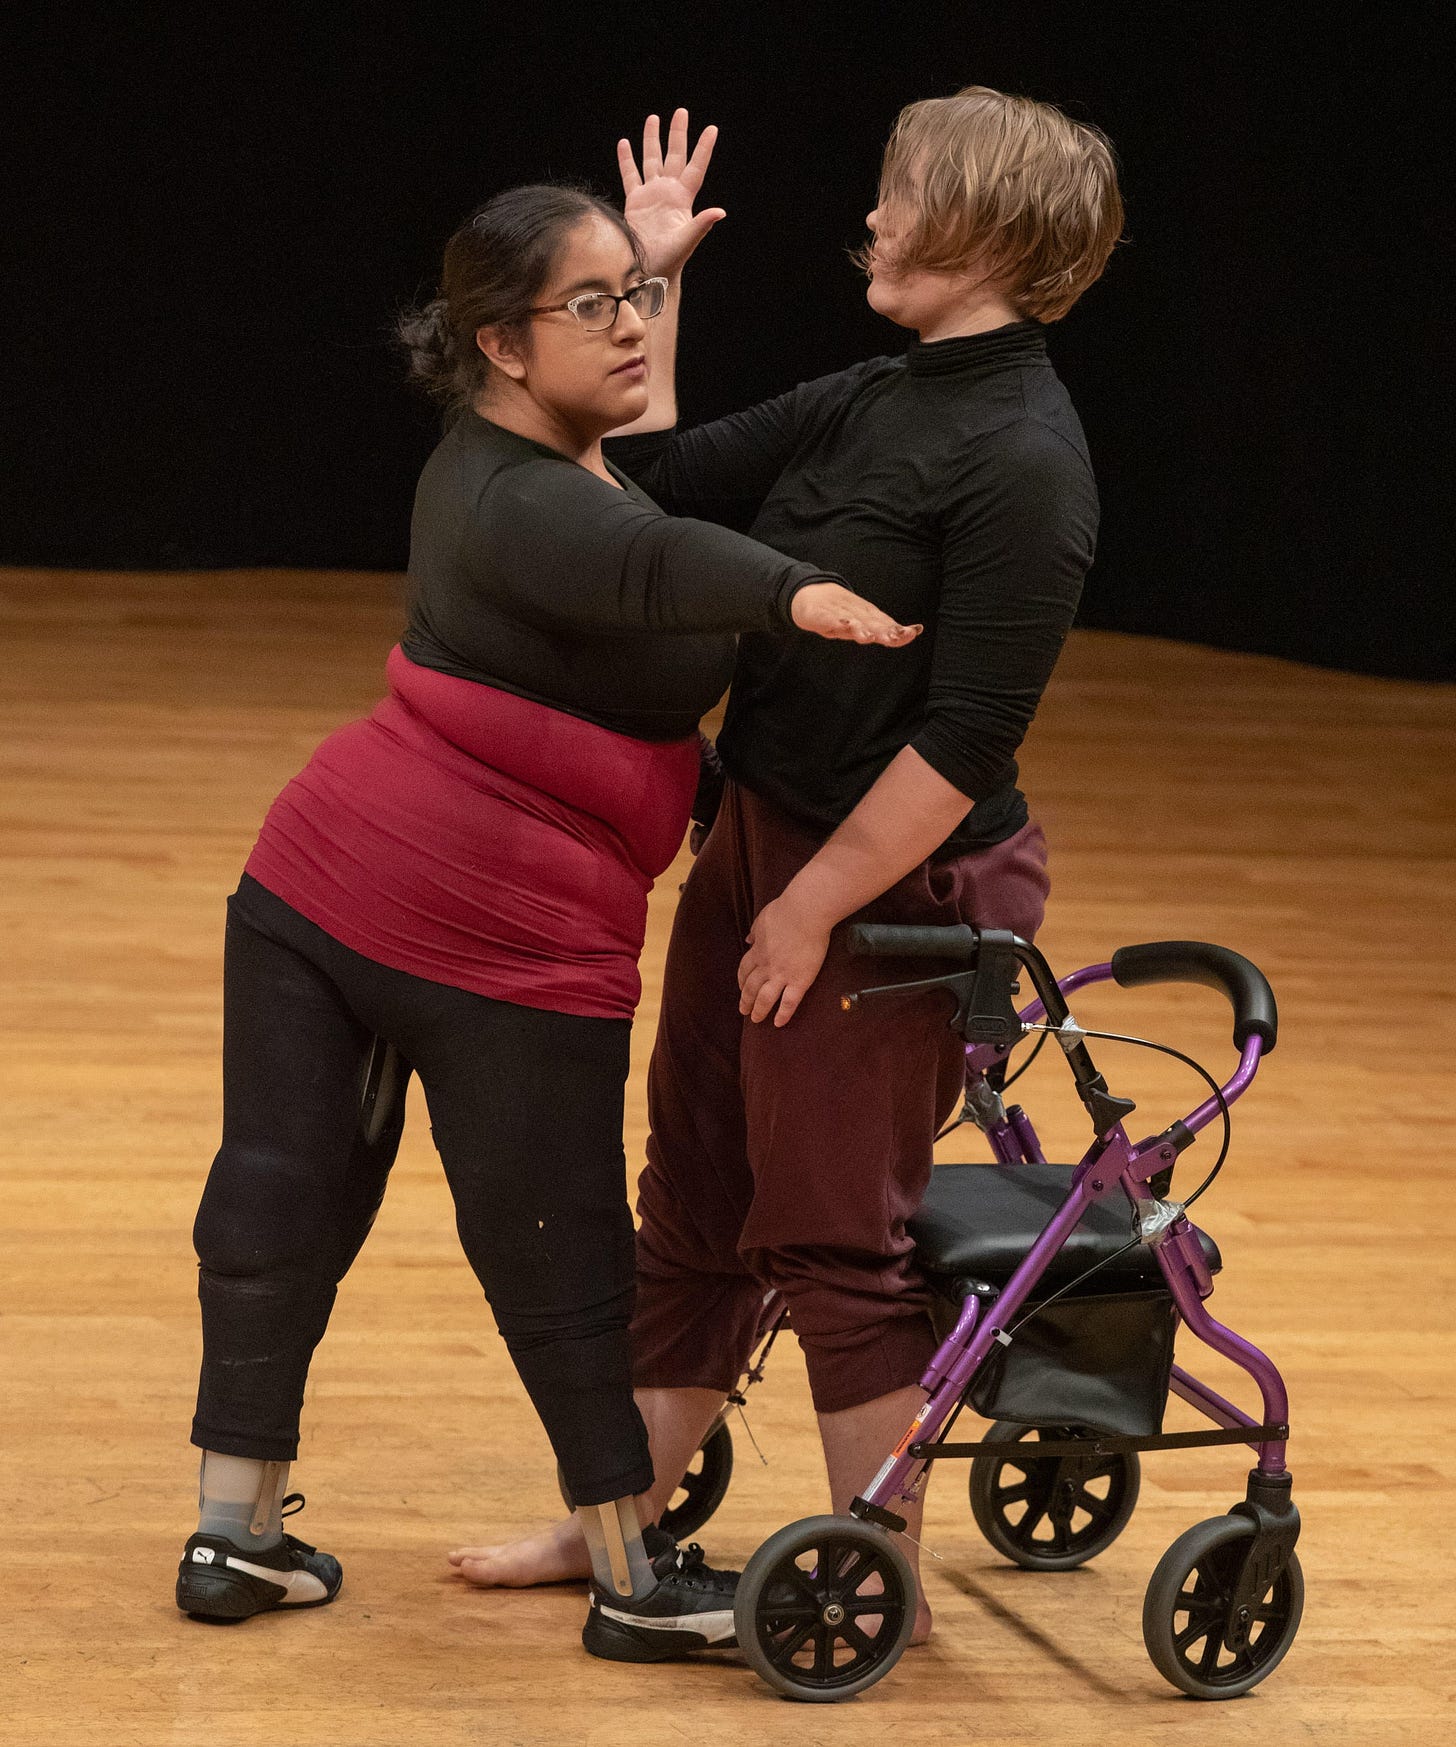 Two disabled dancers stand close, one’s gaze following an outstretched hand, the other facing her with a palm straight up. One dancer wears leg braces, the other has a wheeled walker/chair nearby.